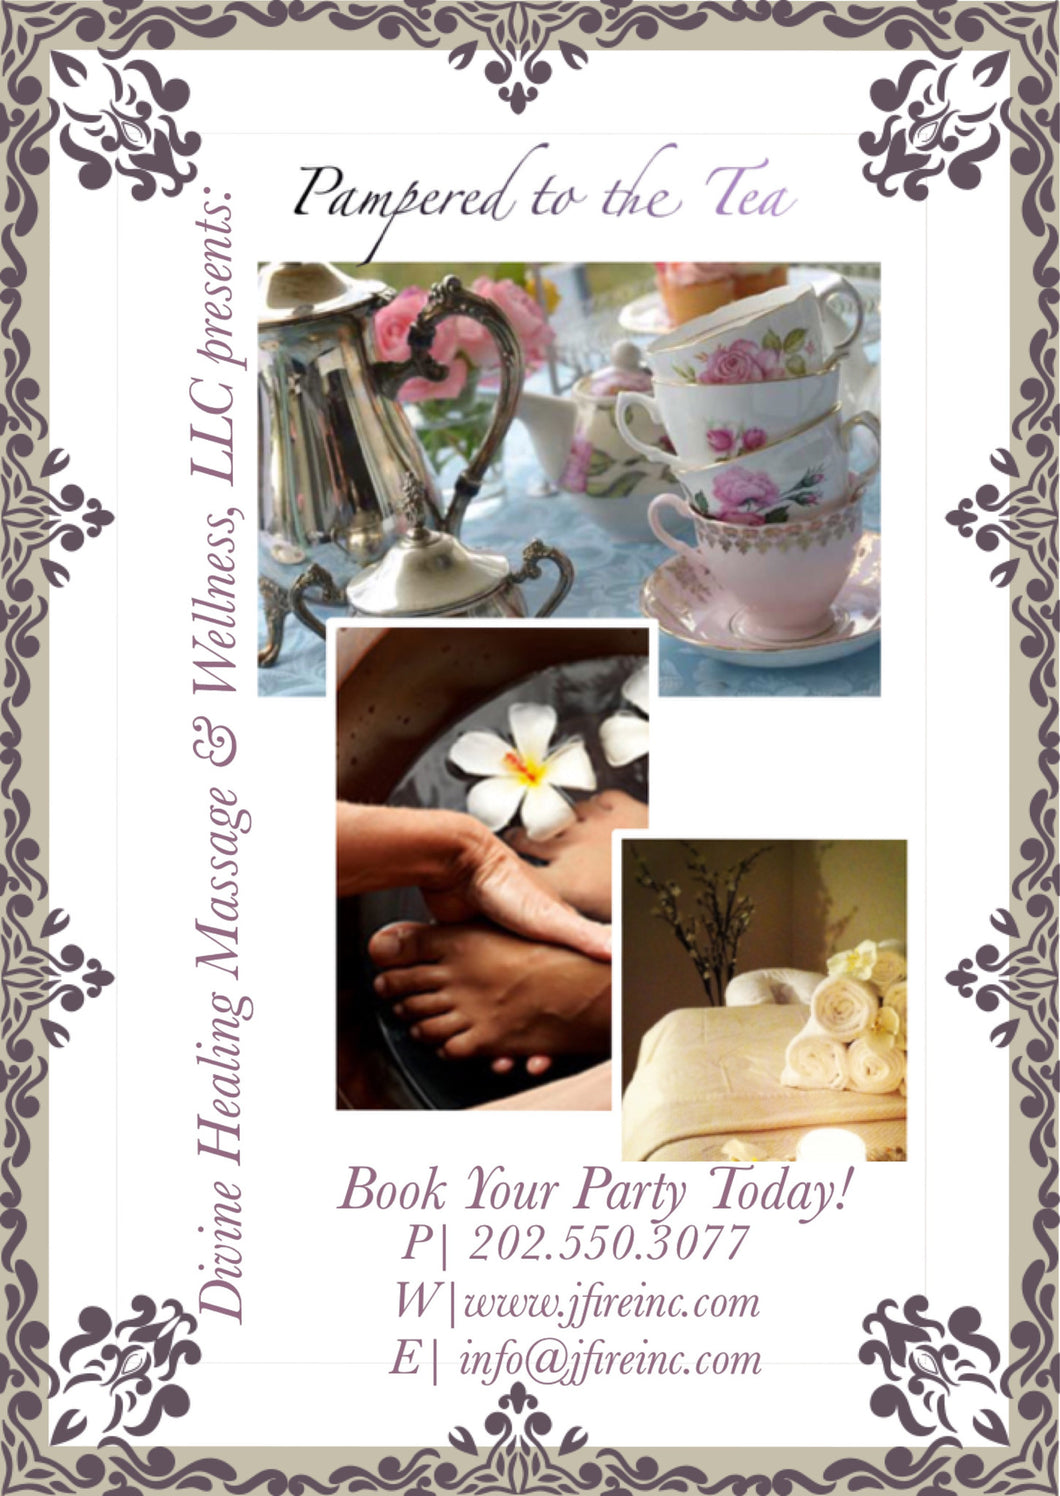 Pampered to the Tea (Private Event)